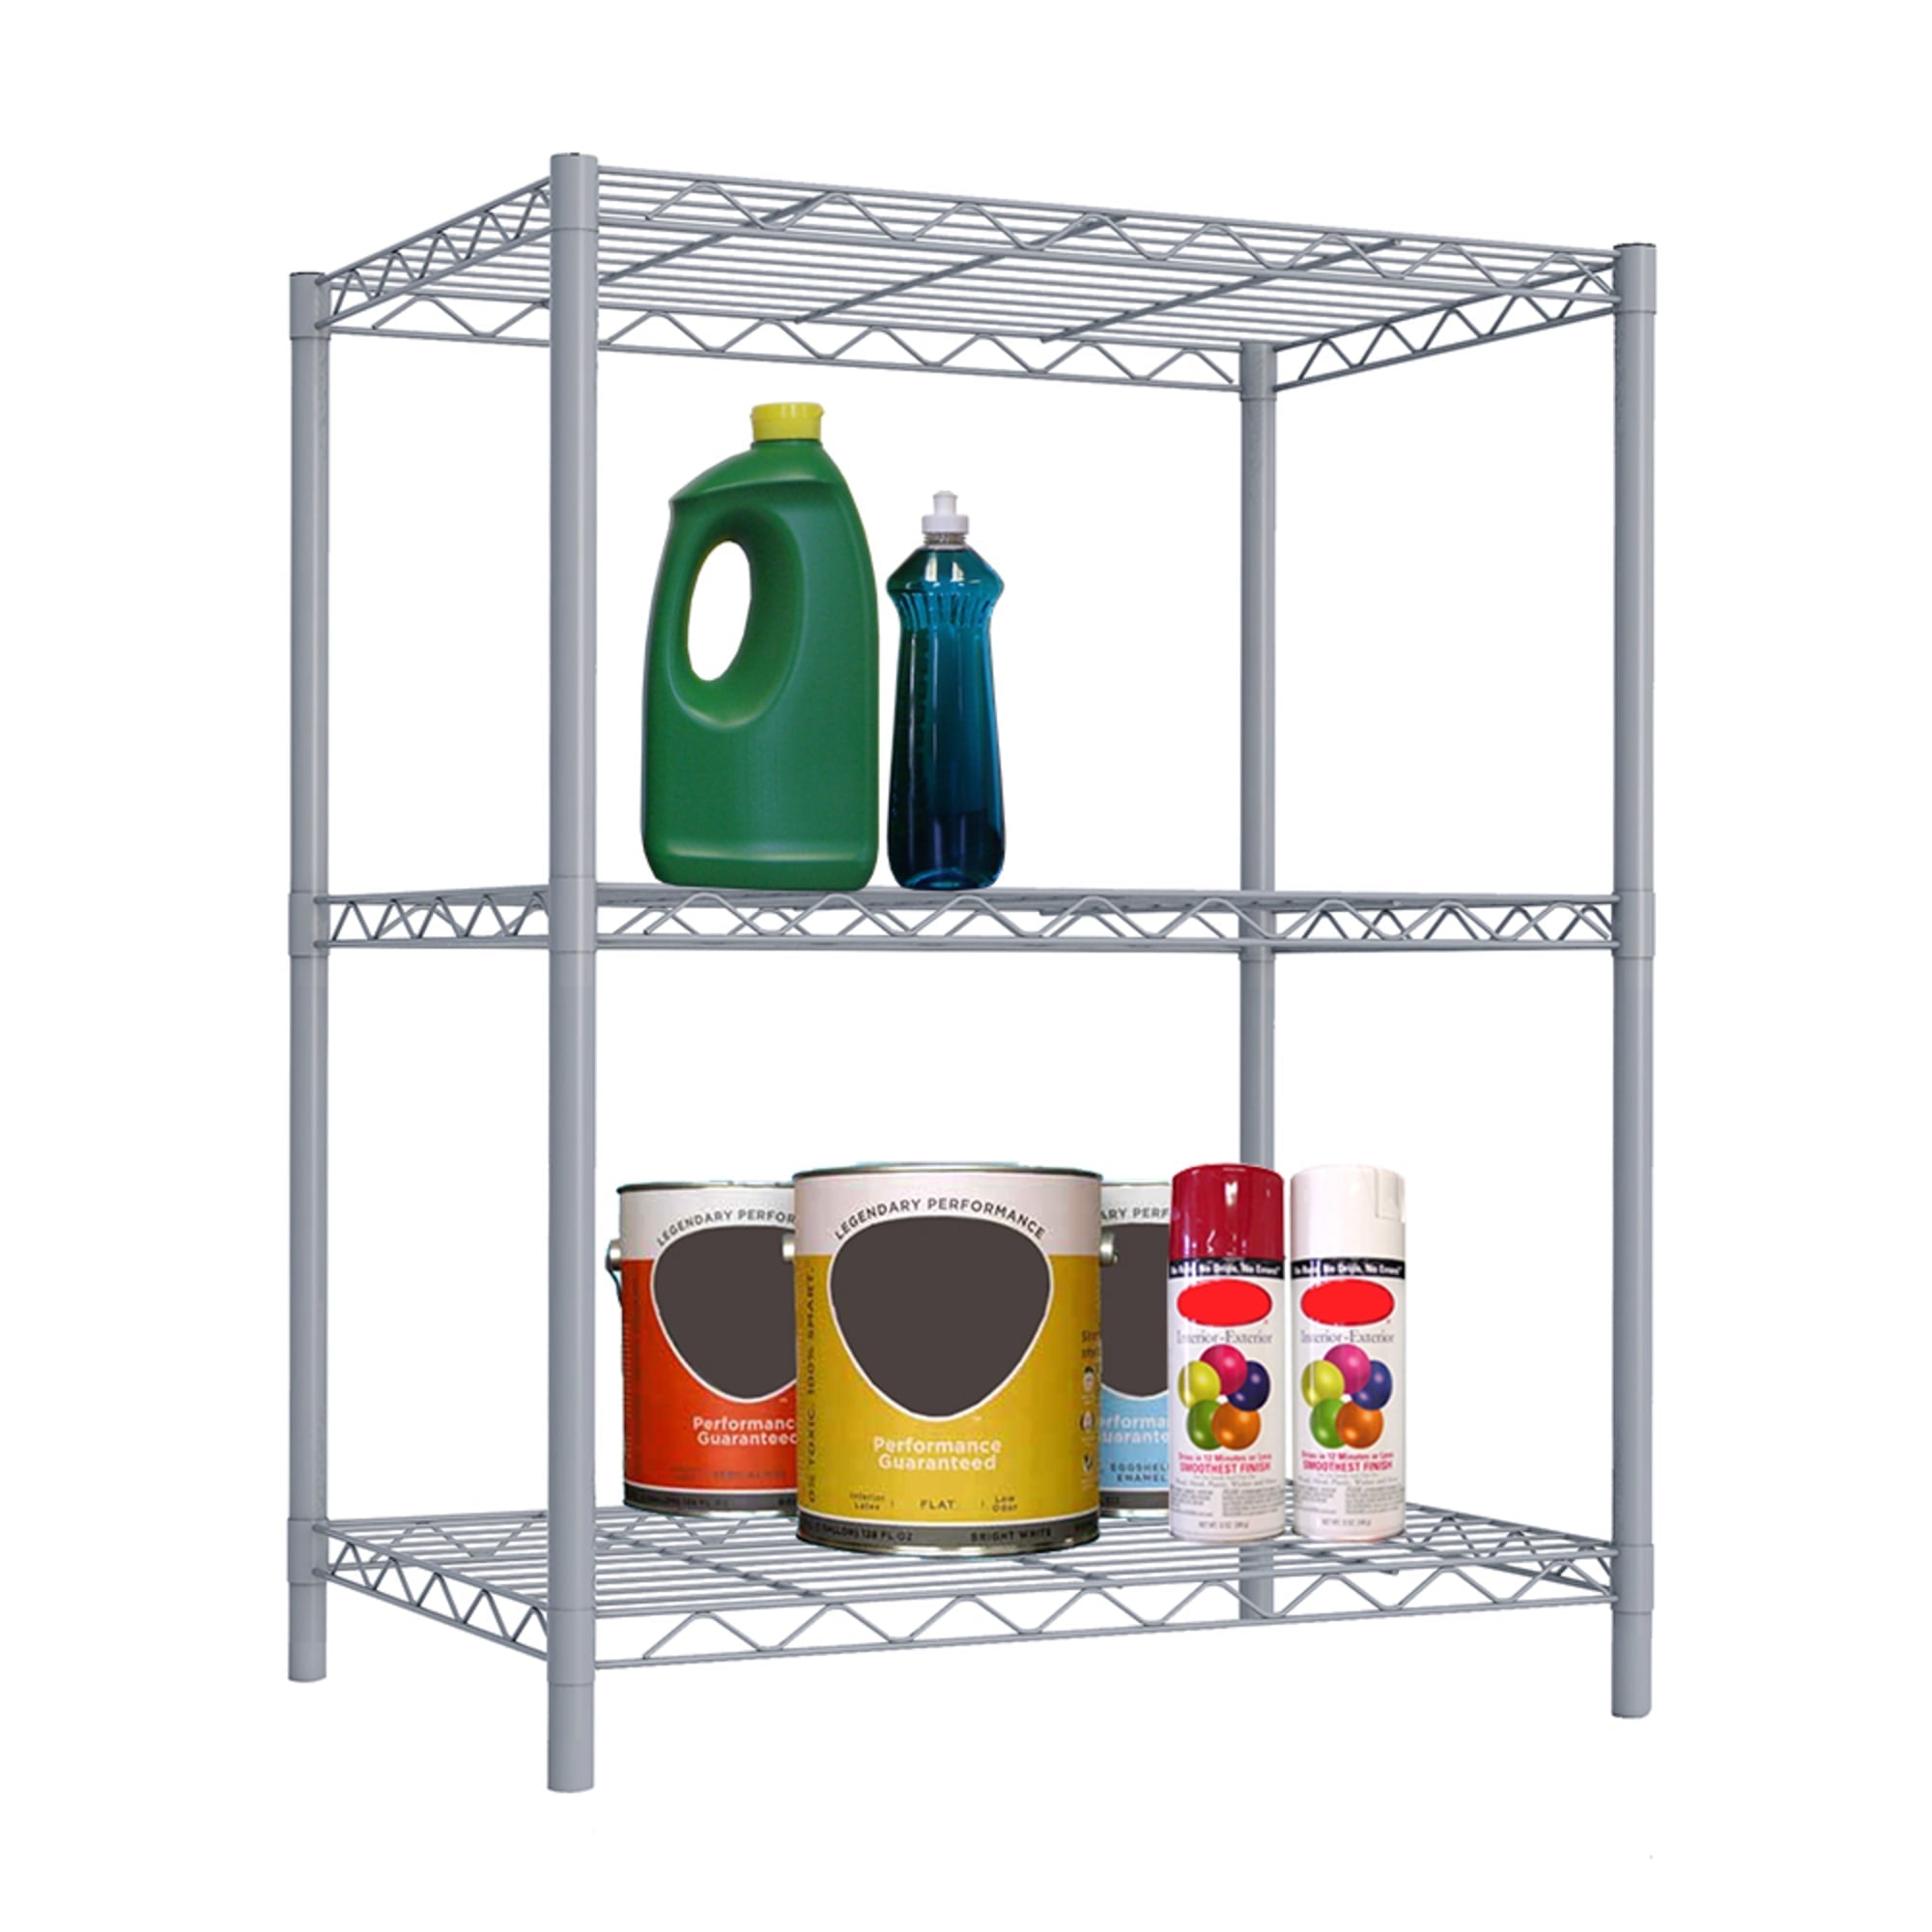 Home Basics 3 Tier Metal Wire Shelf, Grey $30.00 EACH, CASE PACK OF 4